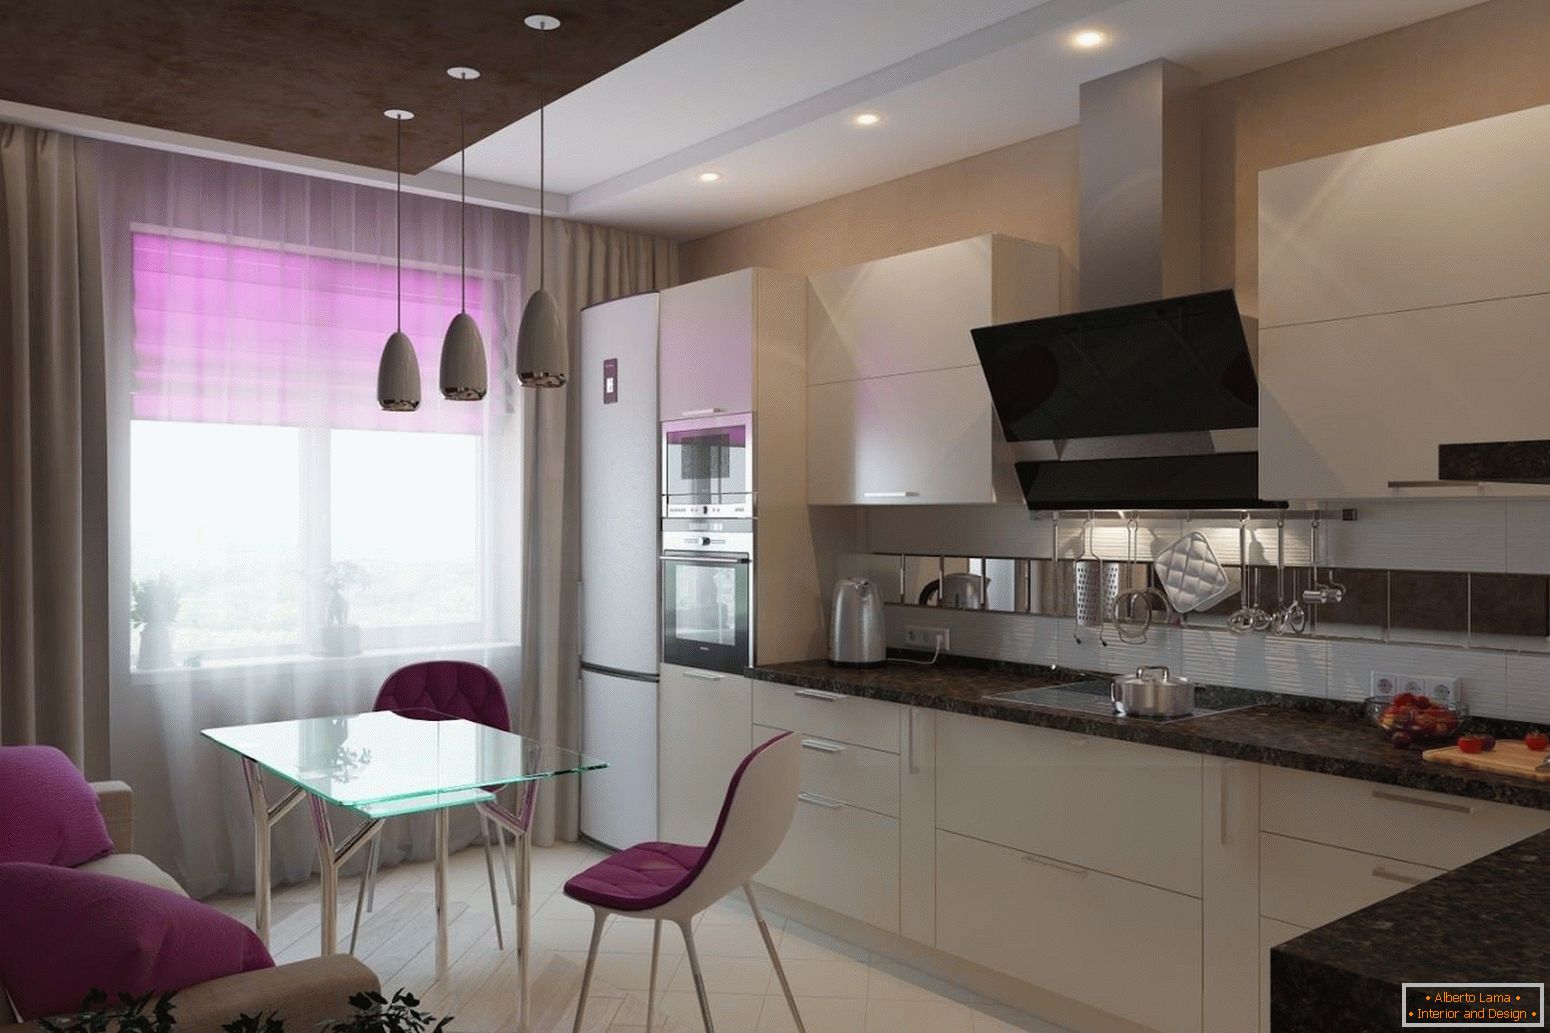 White kitchen with lilac elements of decor